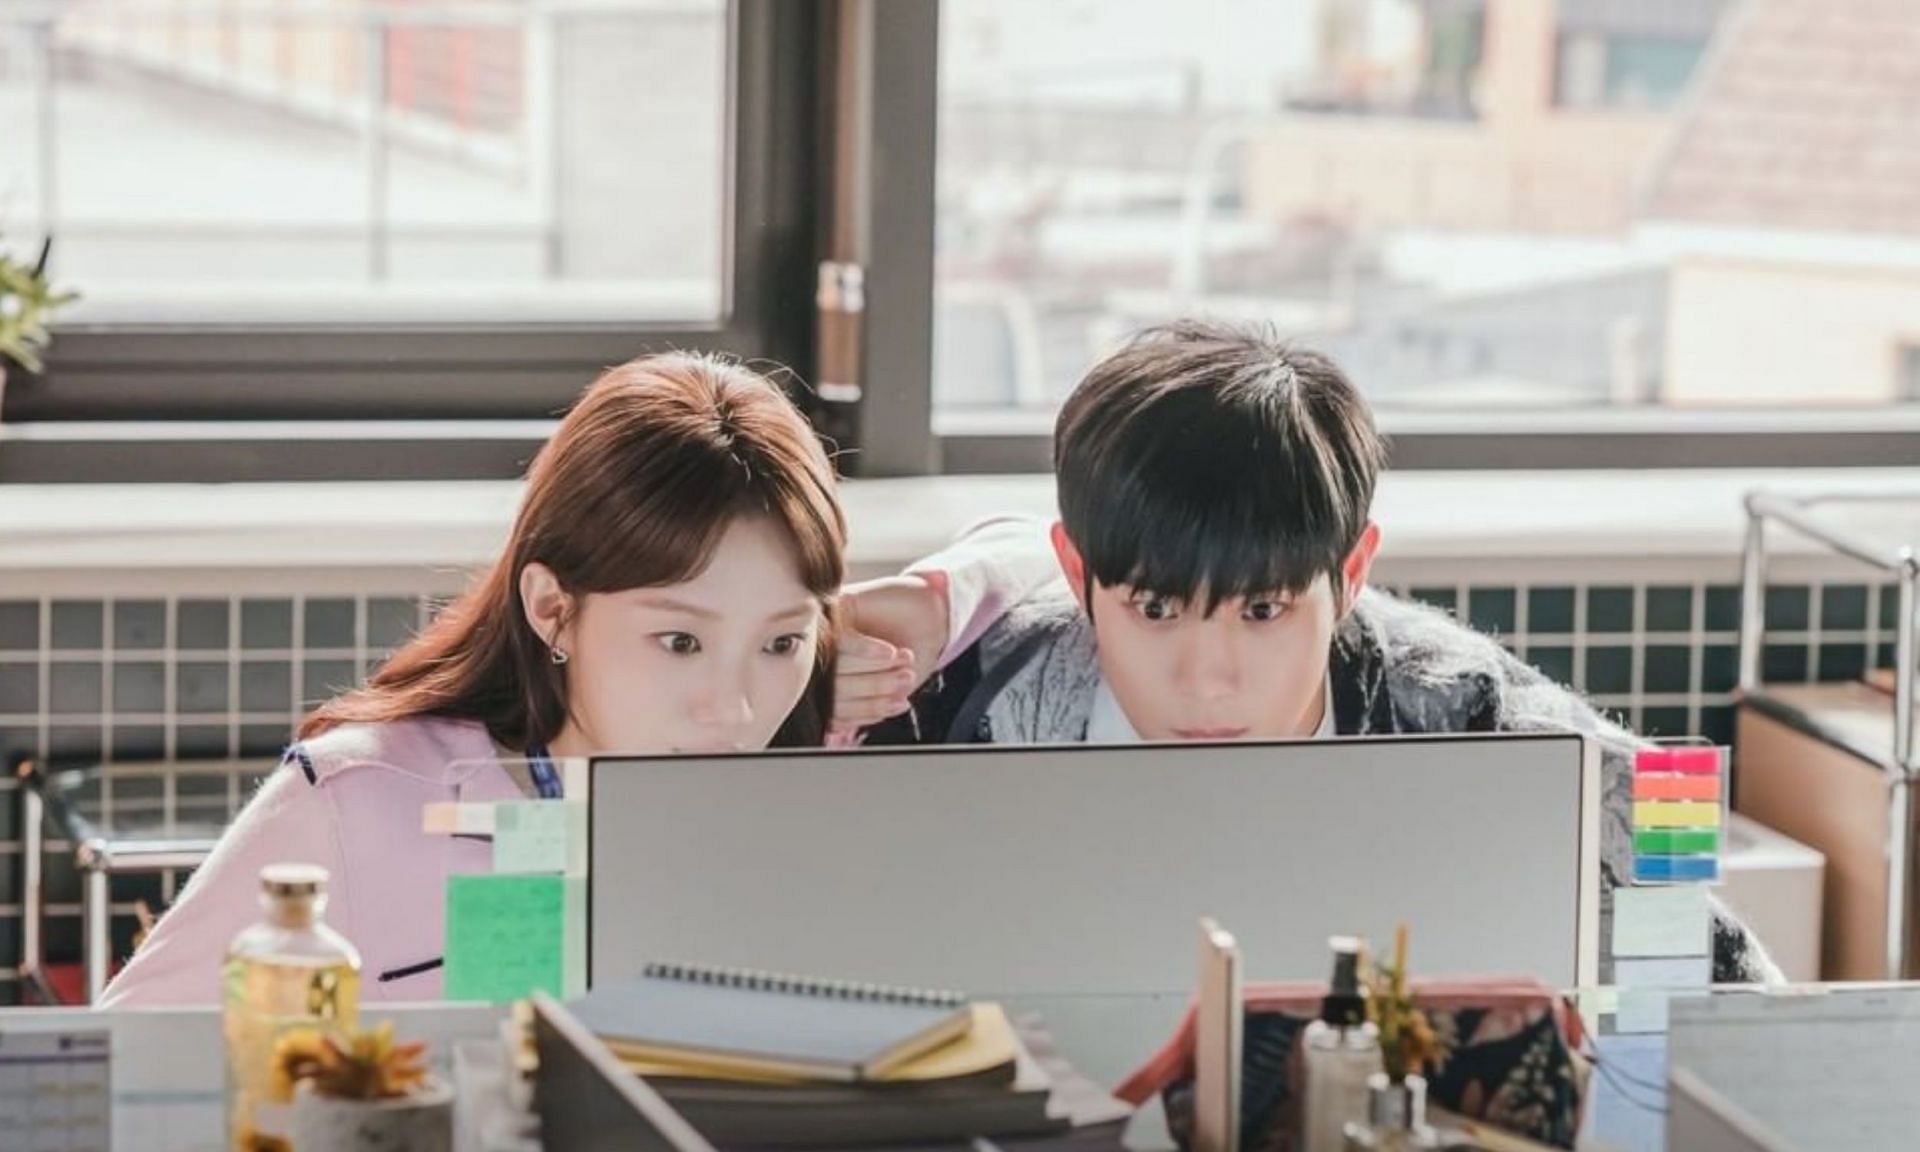 A still of Han-byeol and Tae-sung (Image via tvn_drama/Instagram)